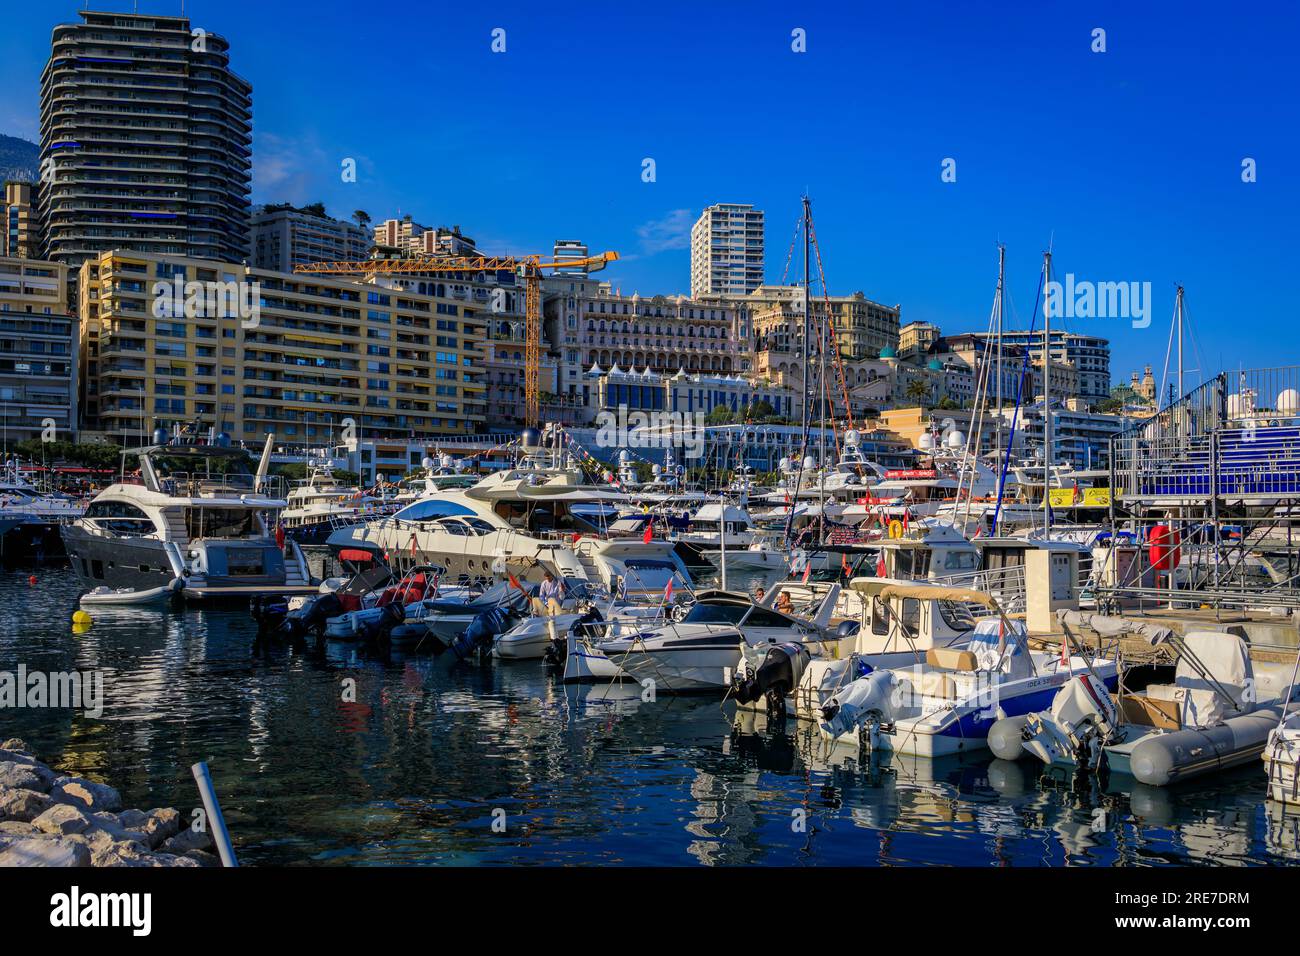 Monte Carlo, Monaco - May 24, 2023: Luxury yachts and empty grand stands tribunes in Yacht Club marina harbor for the Monaco Grand Prix F1 race Stock Photo